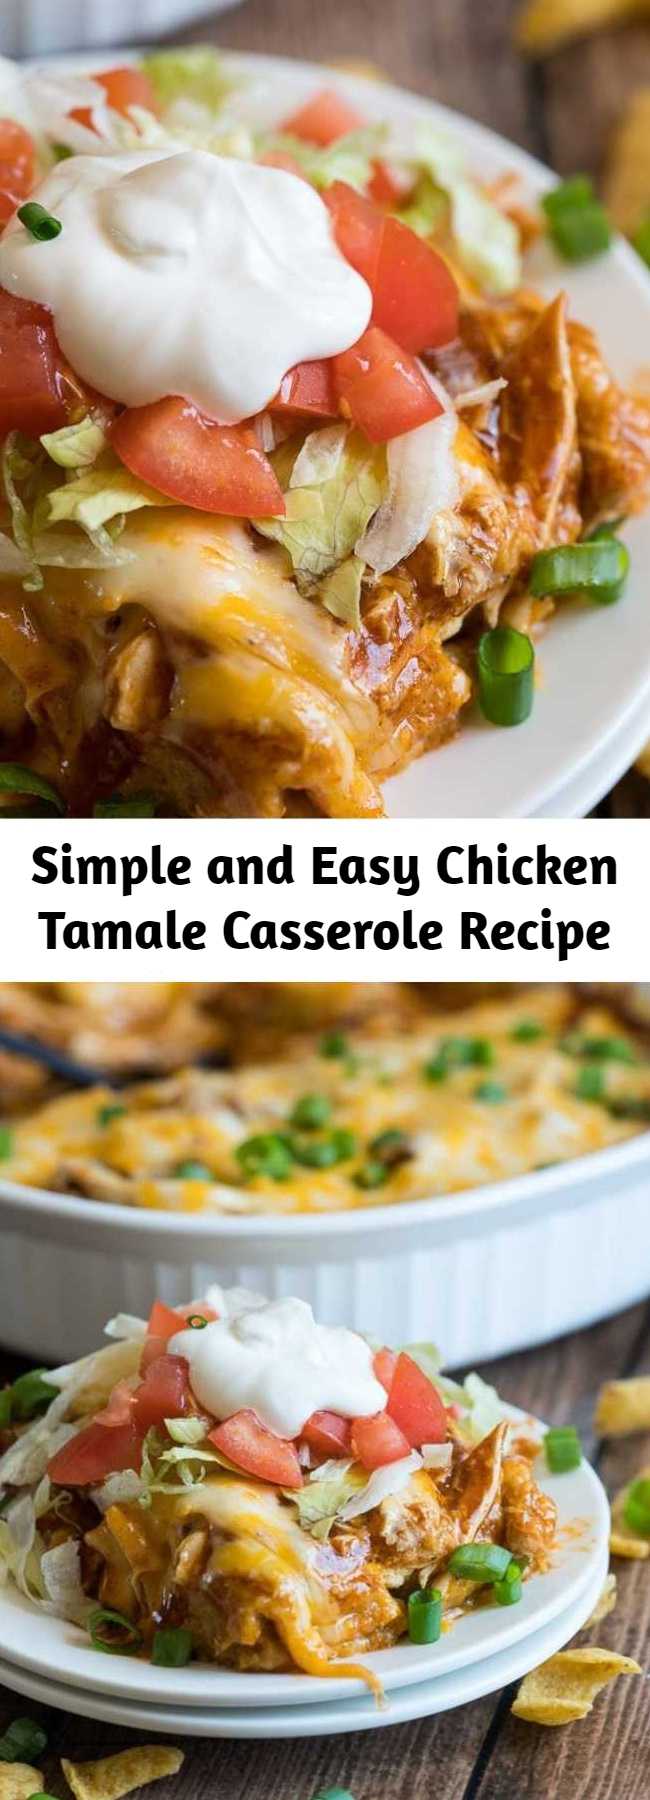 Simple and Easy Chicken Tamale Casserole Recipe - This cheesy Chicken Tamale Casserole is a quick and easy family weeknight dinner that has all the flavors of classic tamales without all the fuss!